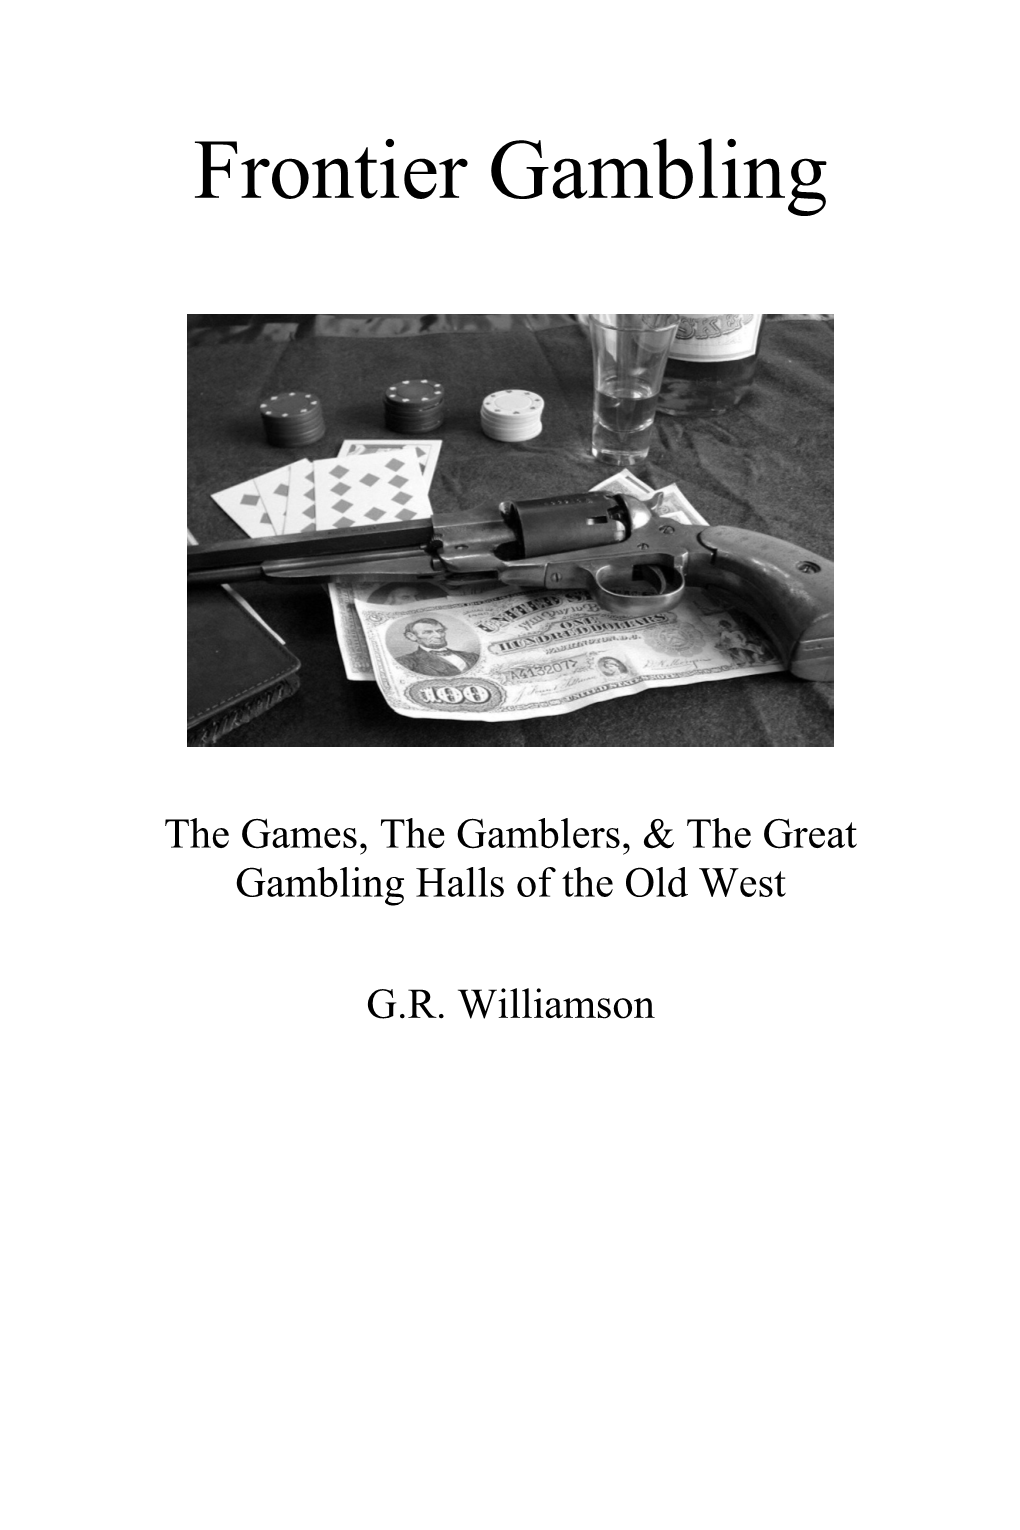 The Games, the Gamblers, & the Great Gambling Halls of the Old West